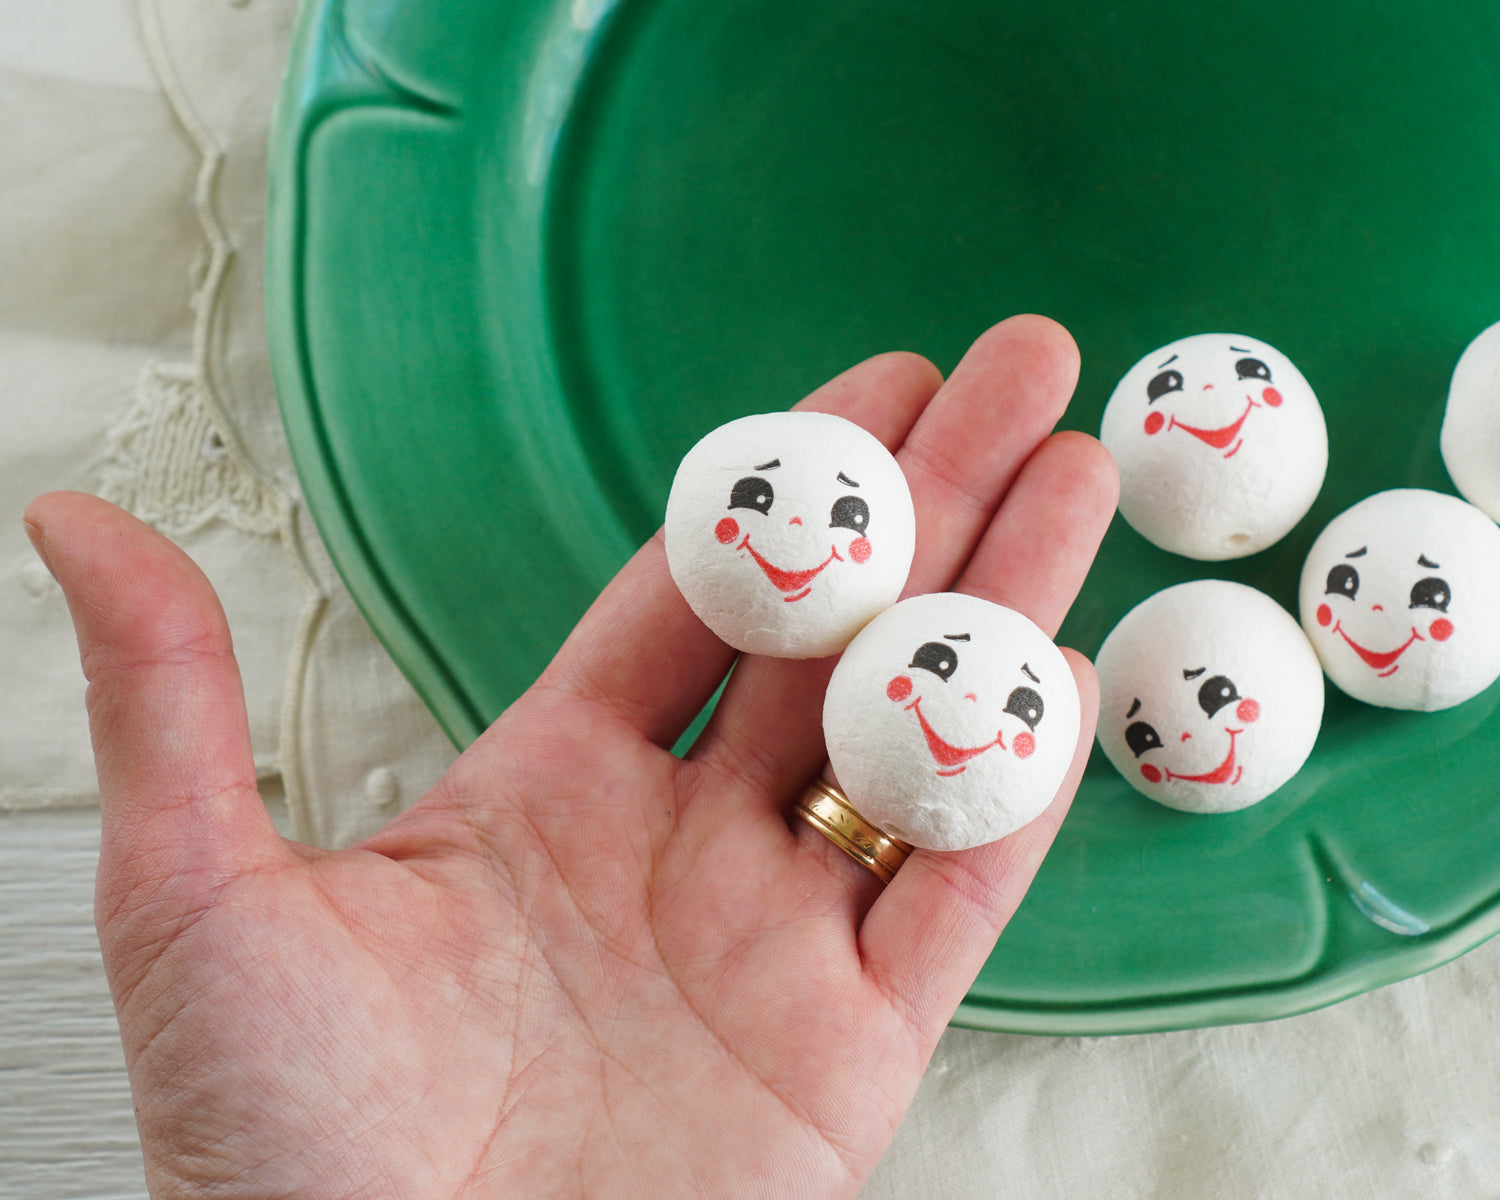 Spun Cotton Heads: FROSTY - Vintage-Style Jolly Snowman Heads with Faces, 12 Pcs.